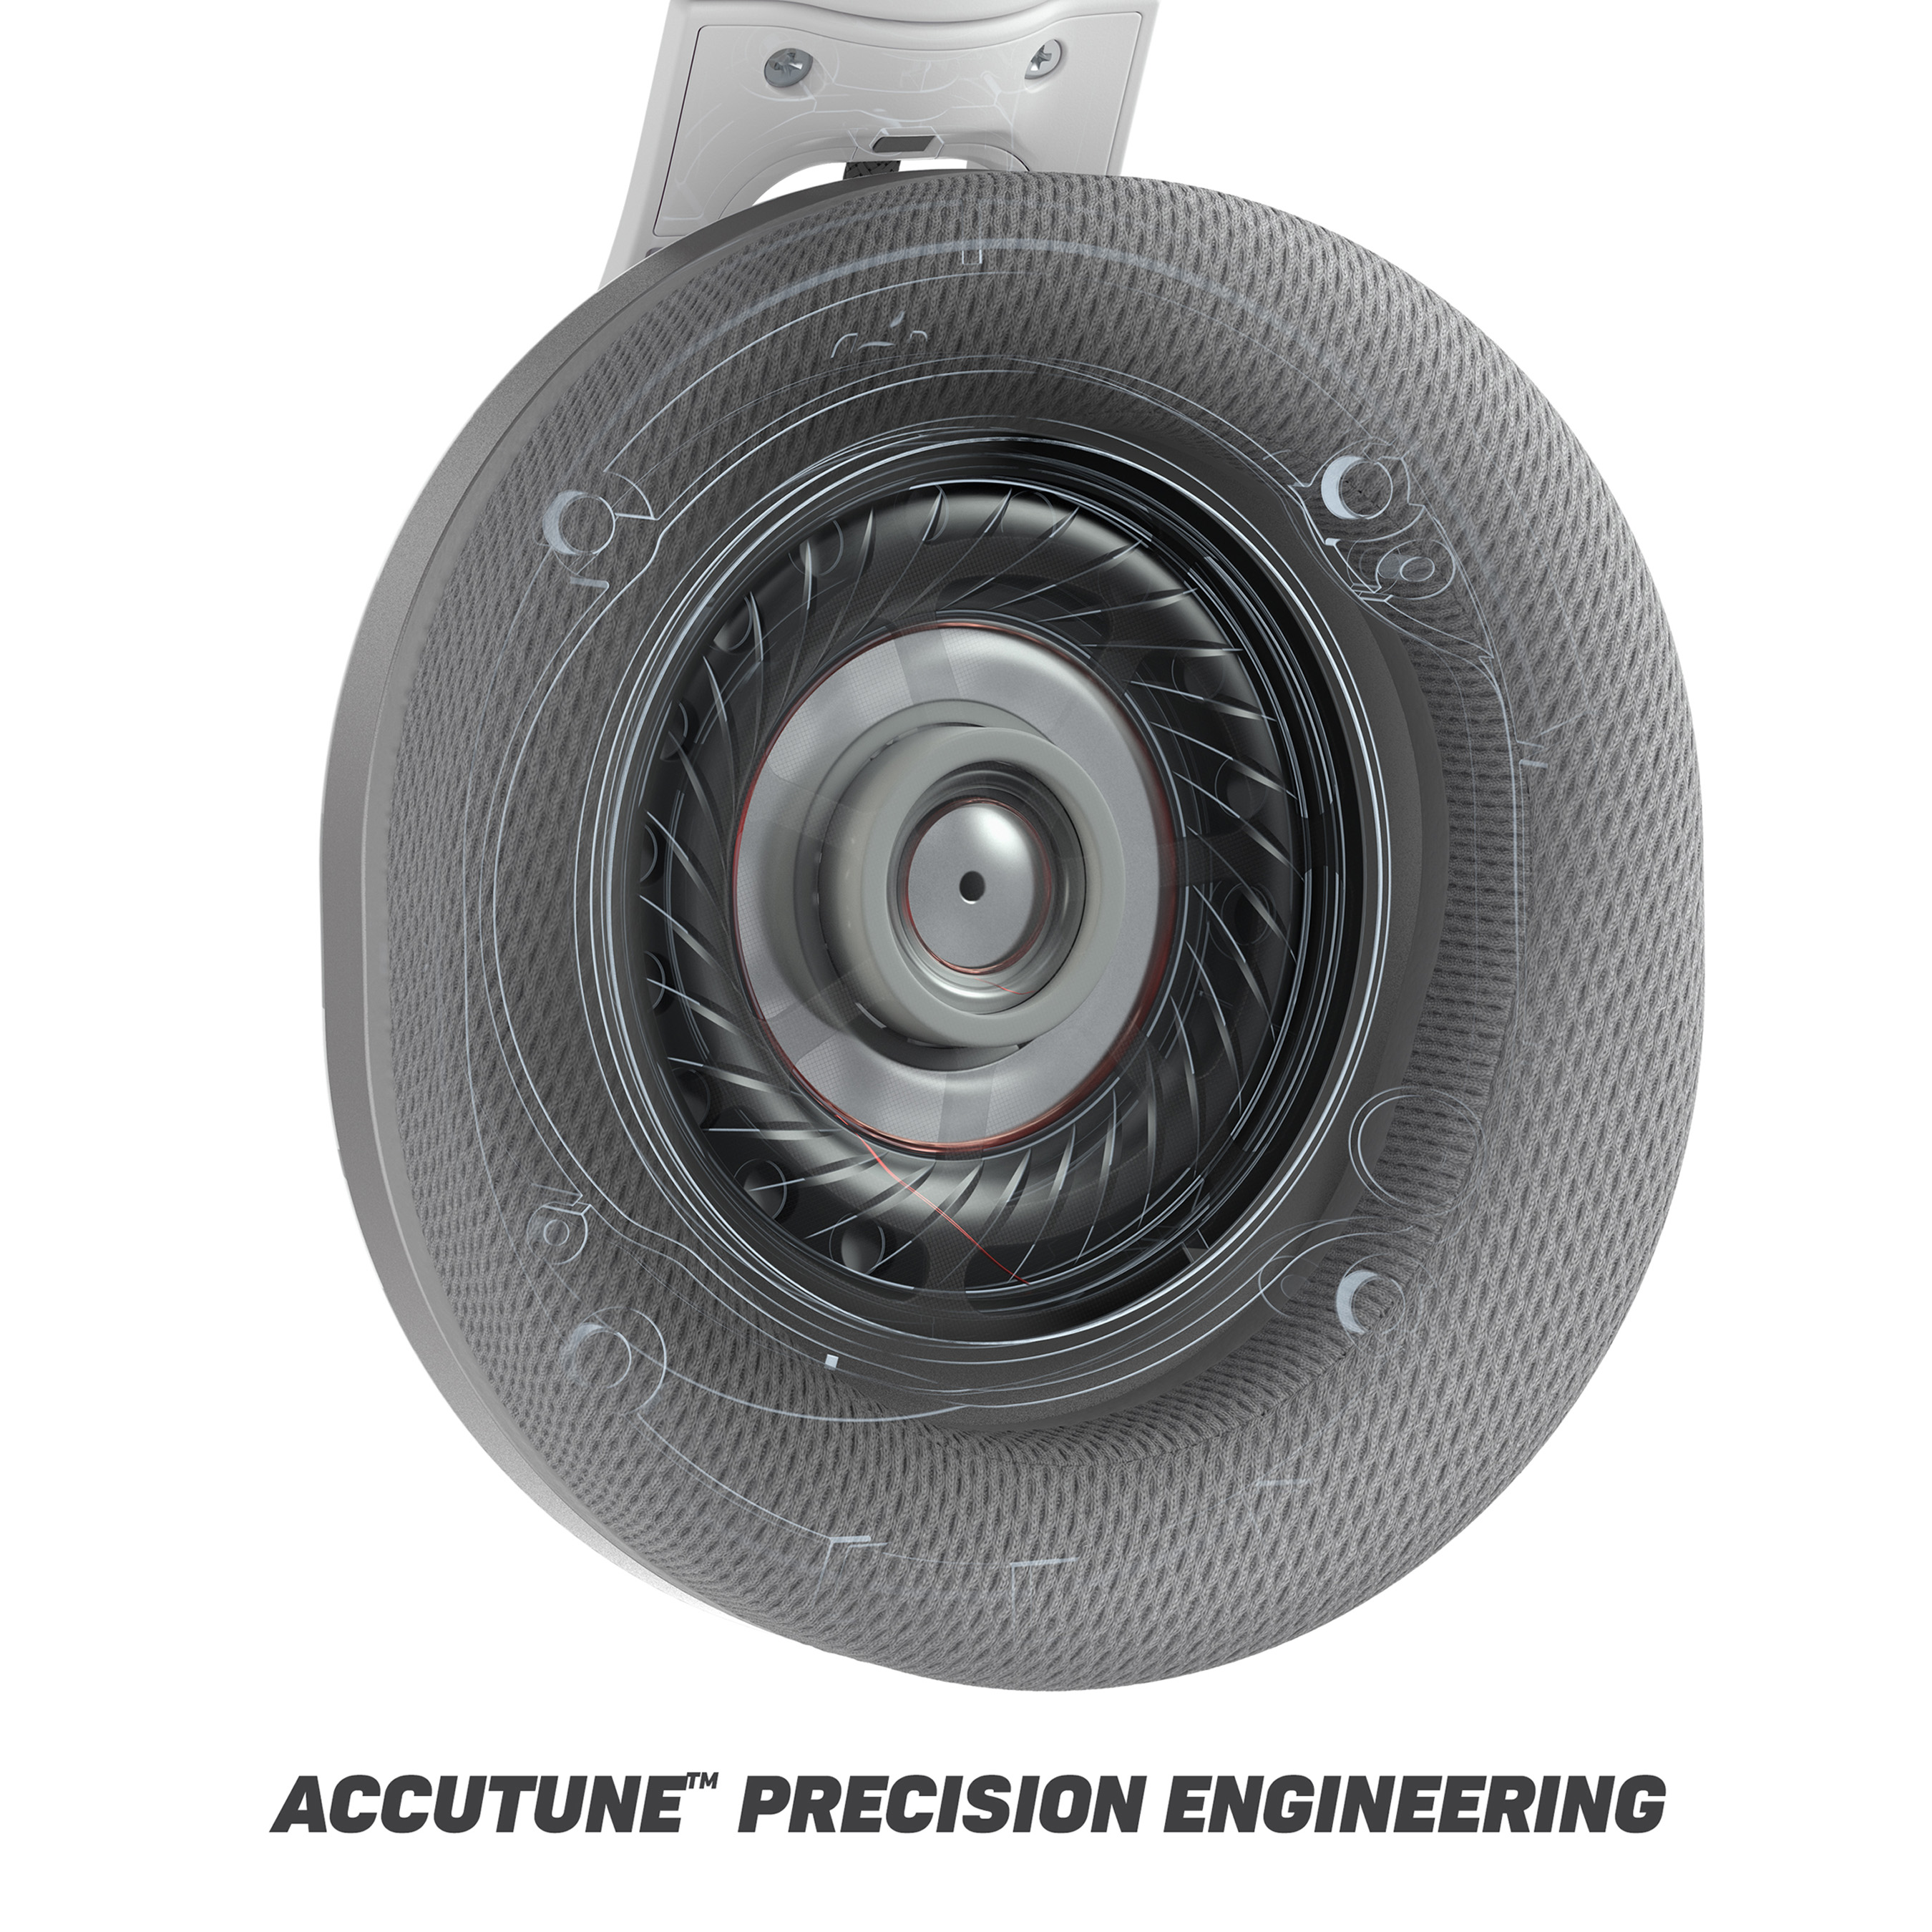 AccuTune™ wood composite-injected earcups provide enhanced acoustics for realistic sound.